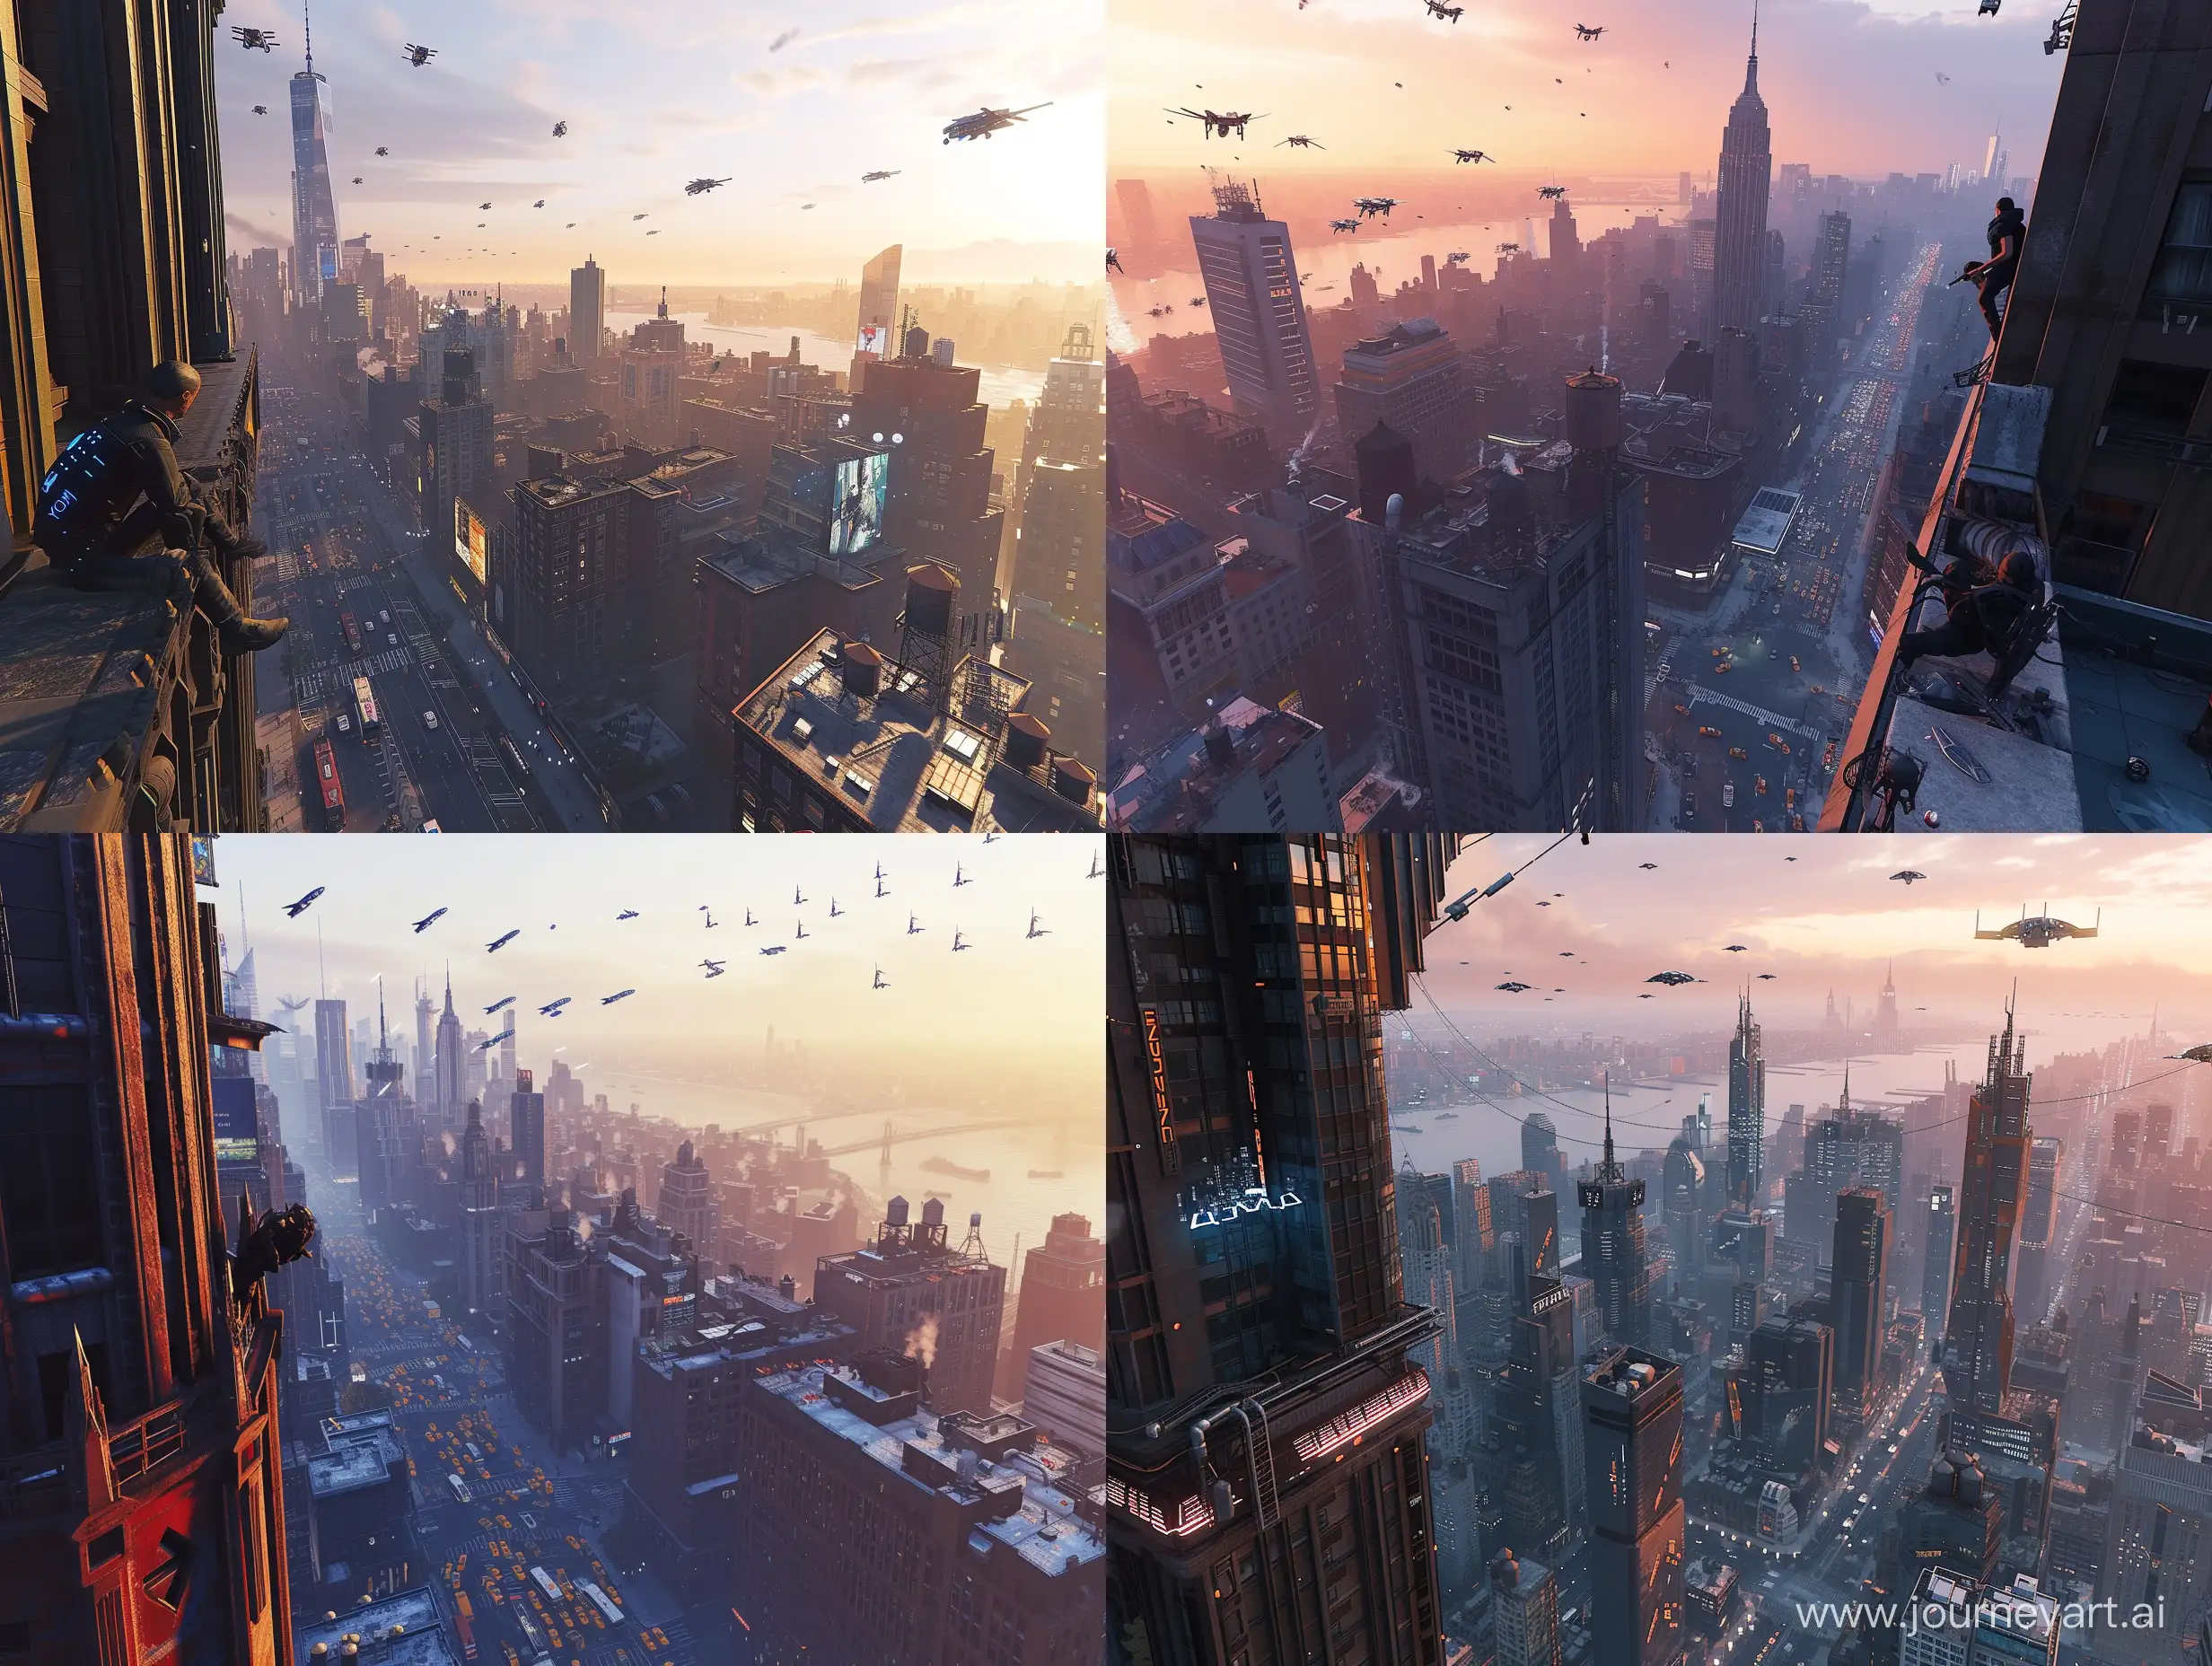 Capture breathtaking images of the open world surroundings in Manhattan, New York. Take the photos from a 3rd-person viewpoint while perched on the edge of a tall rooftop building during the day to capture the cityscape with a science fiction-like quality. You'll be able to capture the full view, transportation, traffic of flying cars, and a dystopian atmosphere. Additionally, you can also capture the unique architecture and landscapes of the city.
